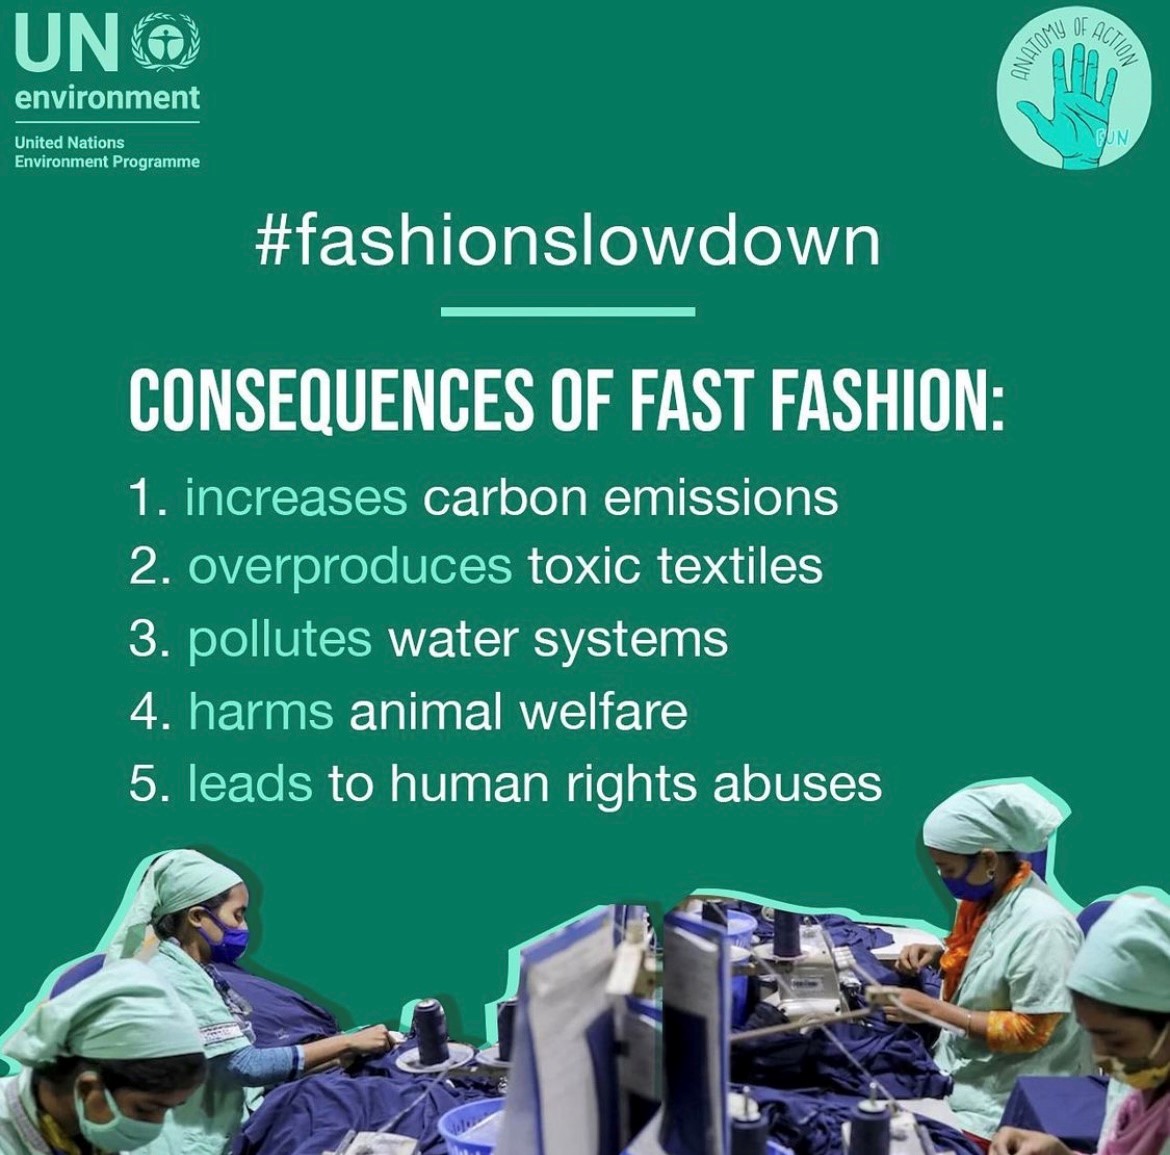 Consequences of fast fashion